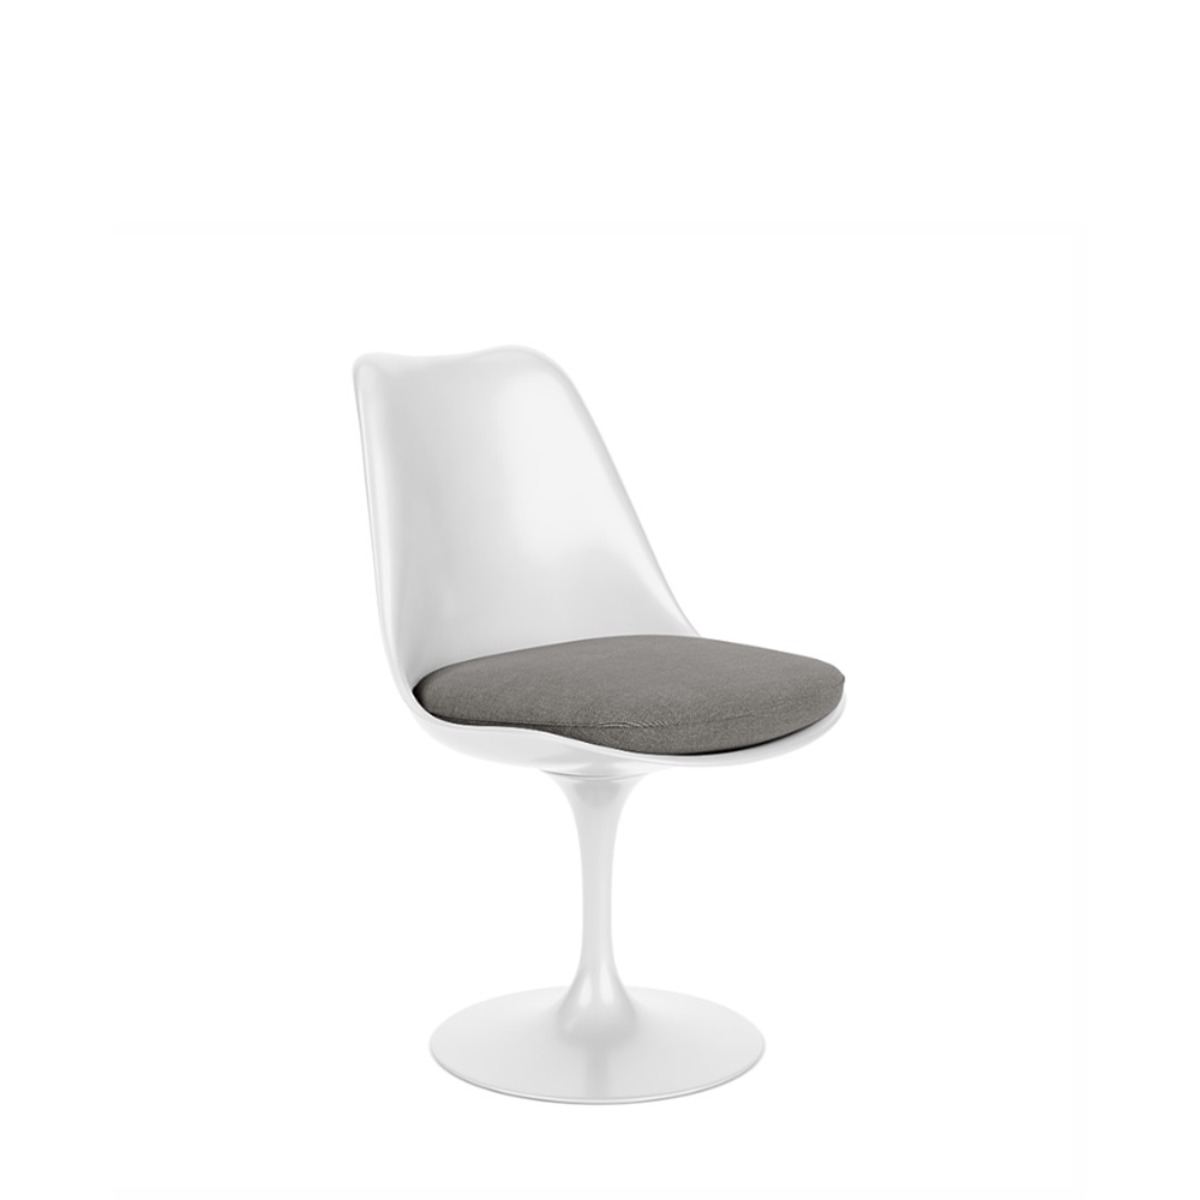 KNOLL Tulip Armless Chair white shell - 8colors